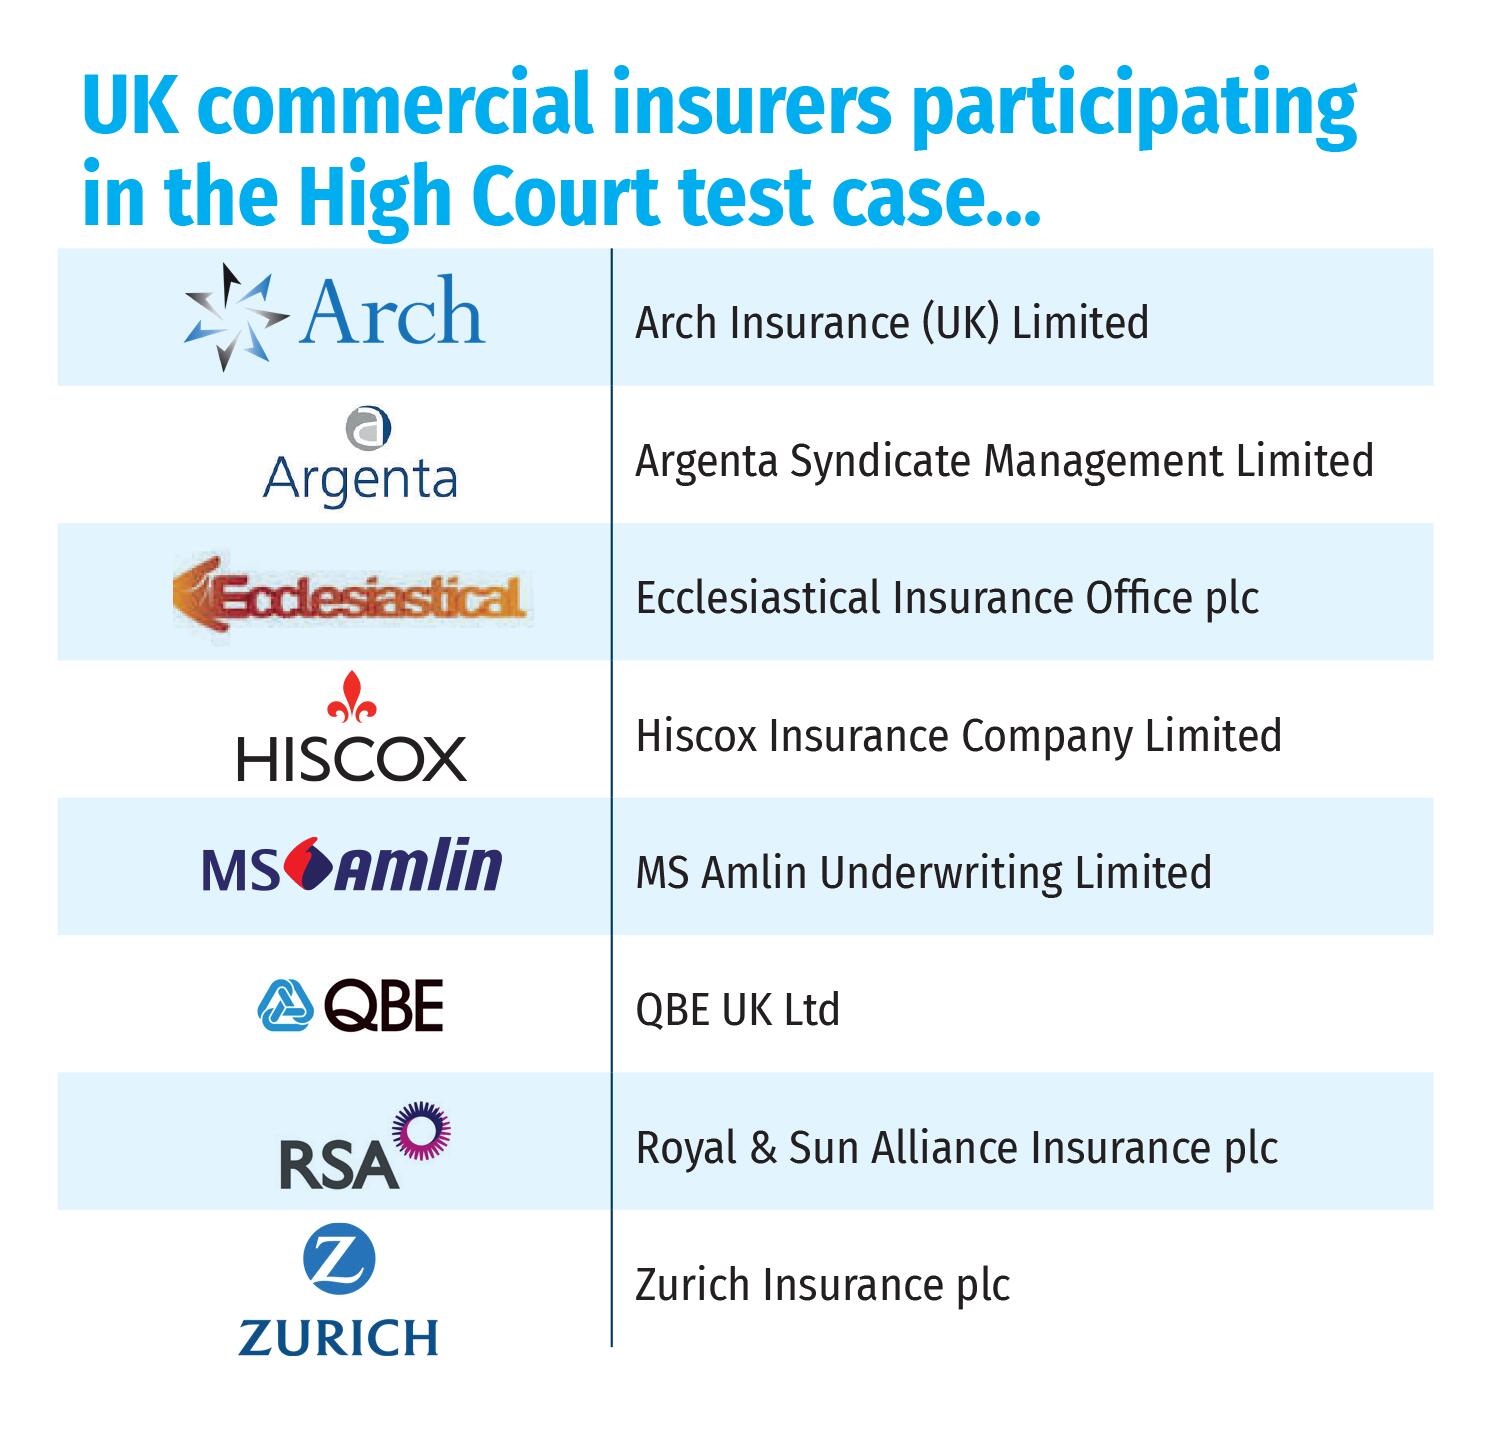 UK commercial insurers participating in the High Court test case...